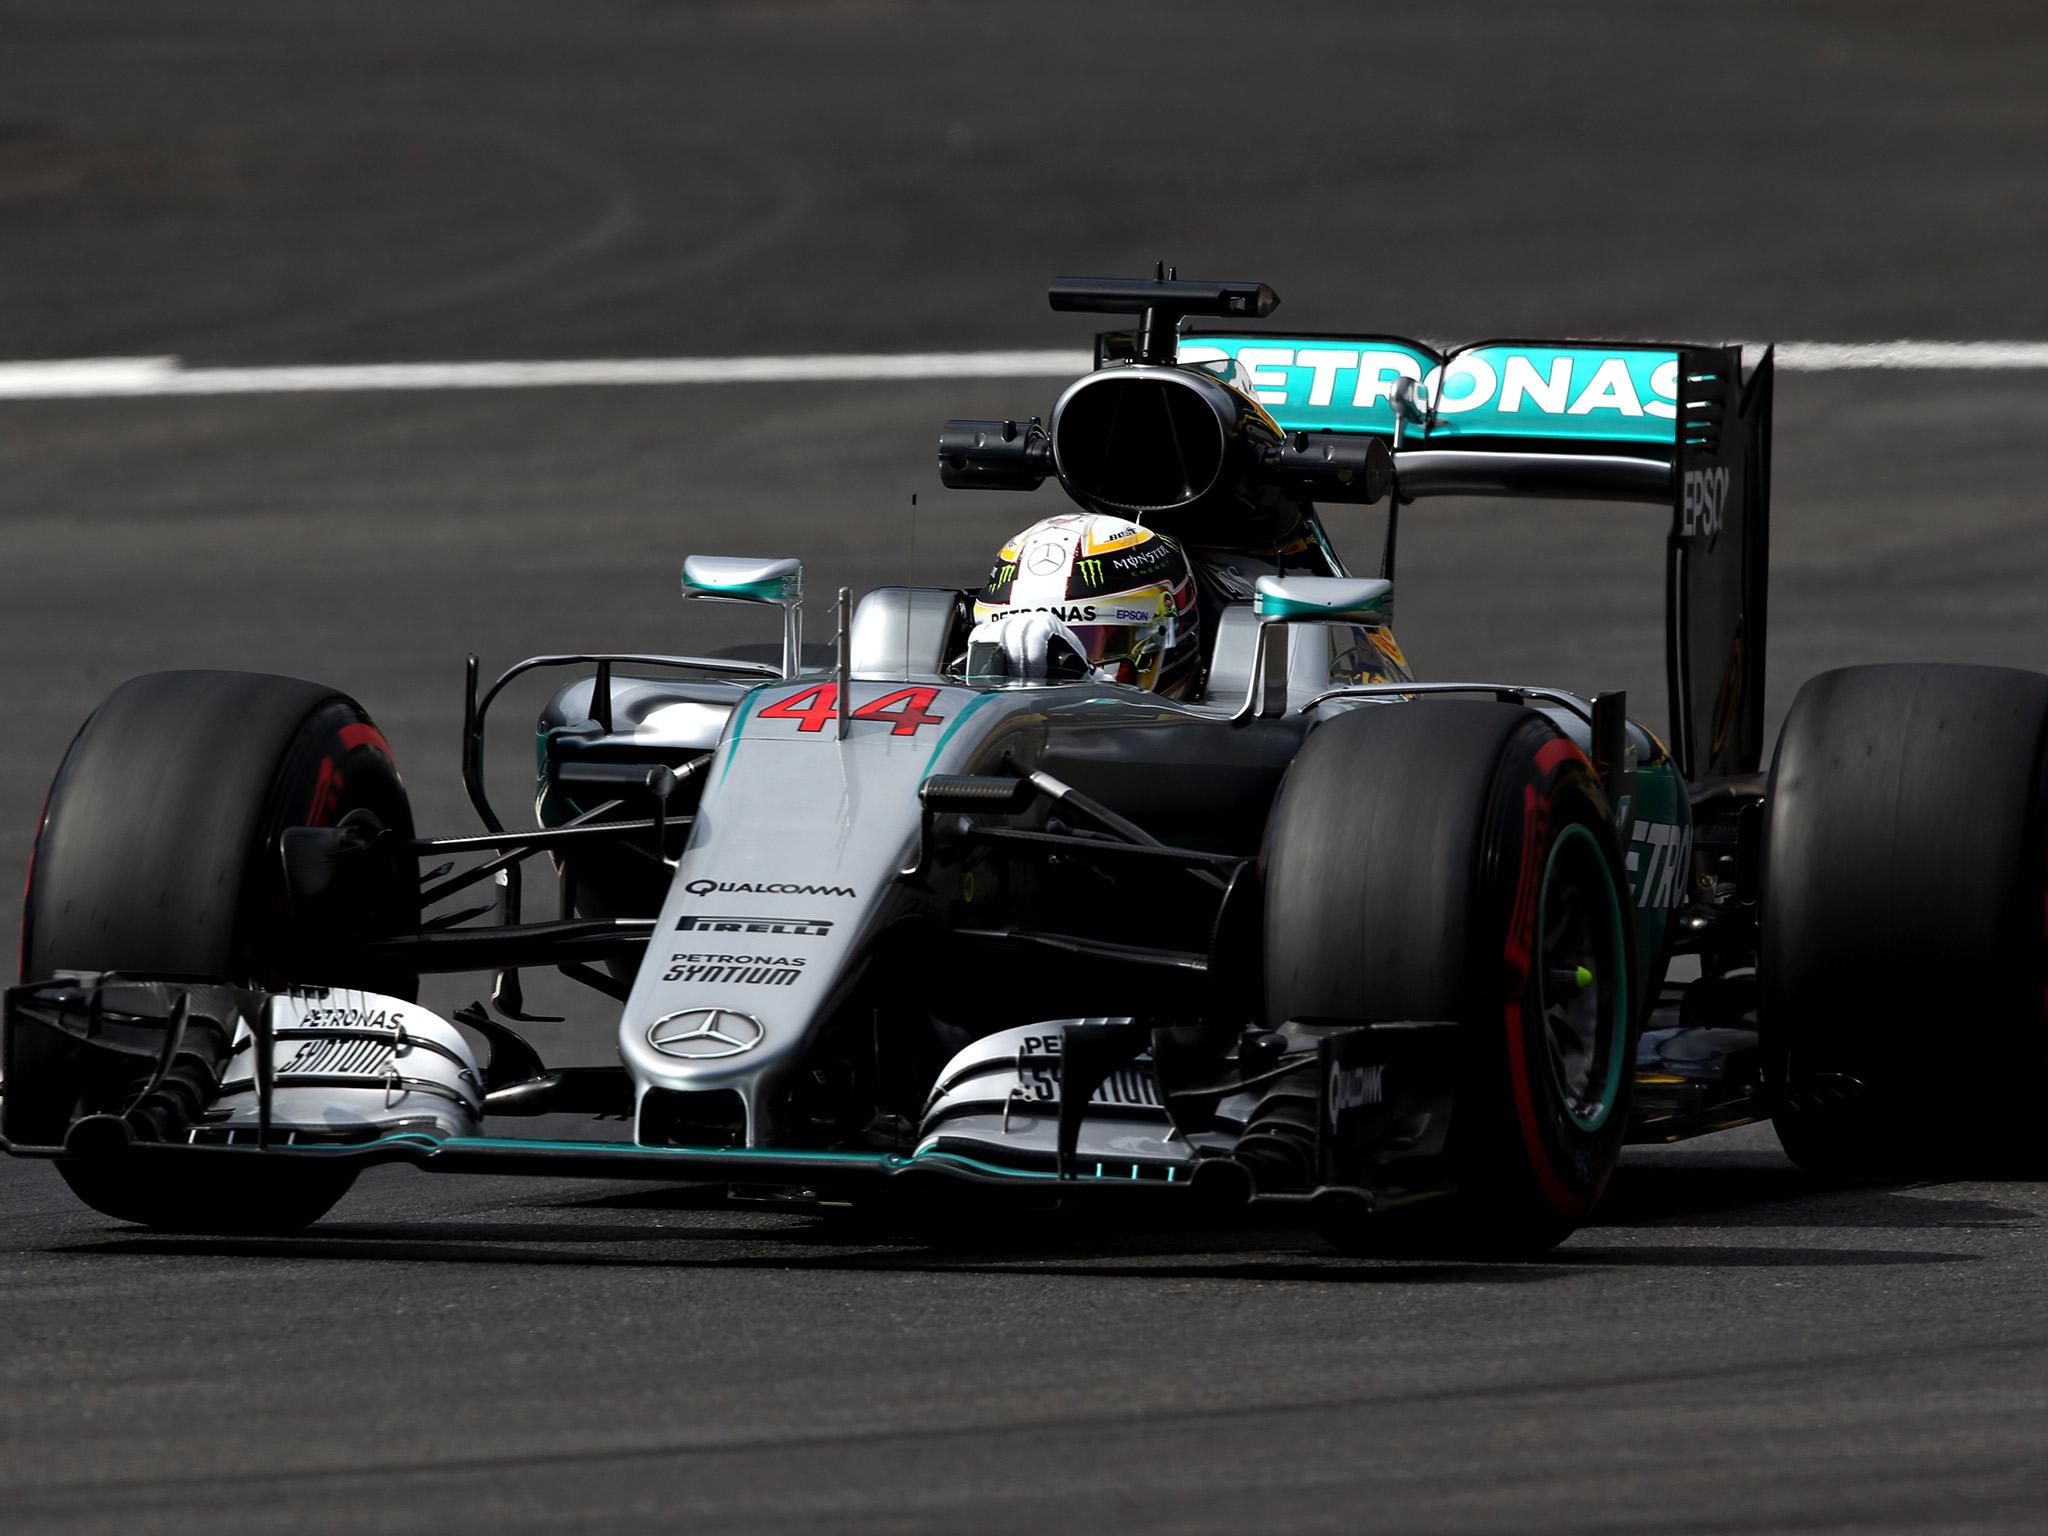 &#13;
Hamilton's Mercedes on the track at Spielberg &#13;